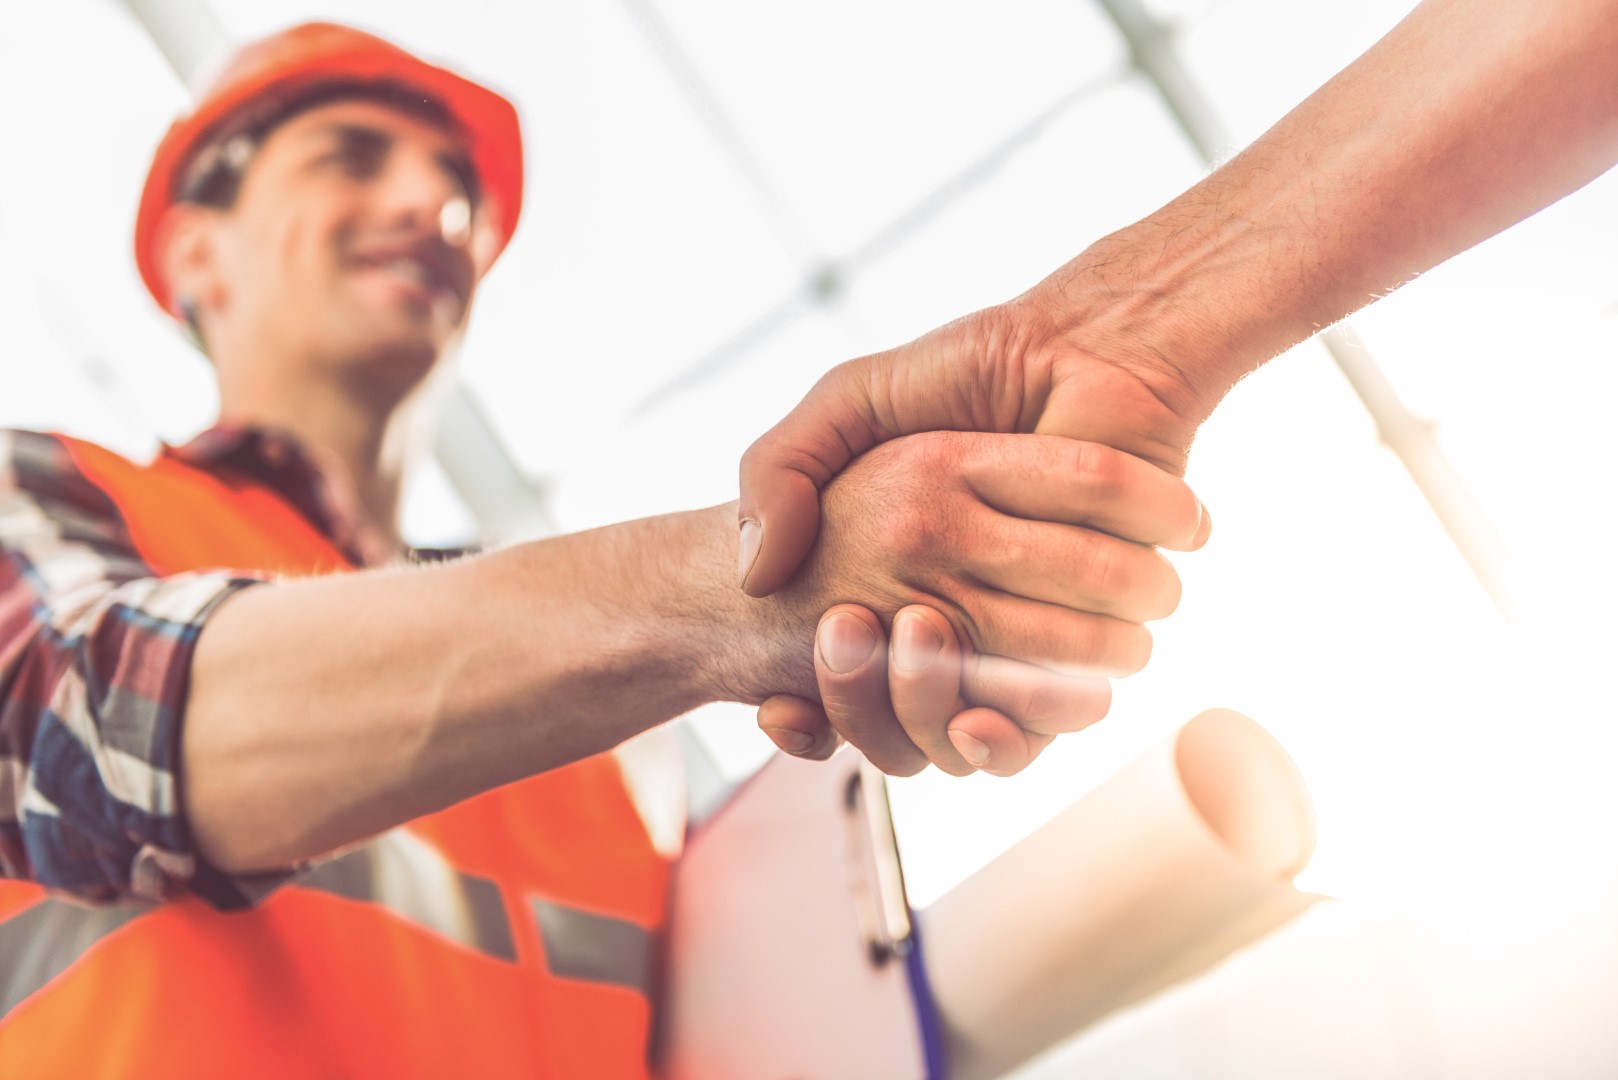 Construction worker with orange vest and hard hat shaking hands